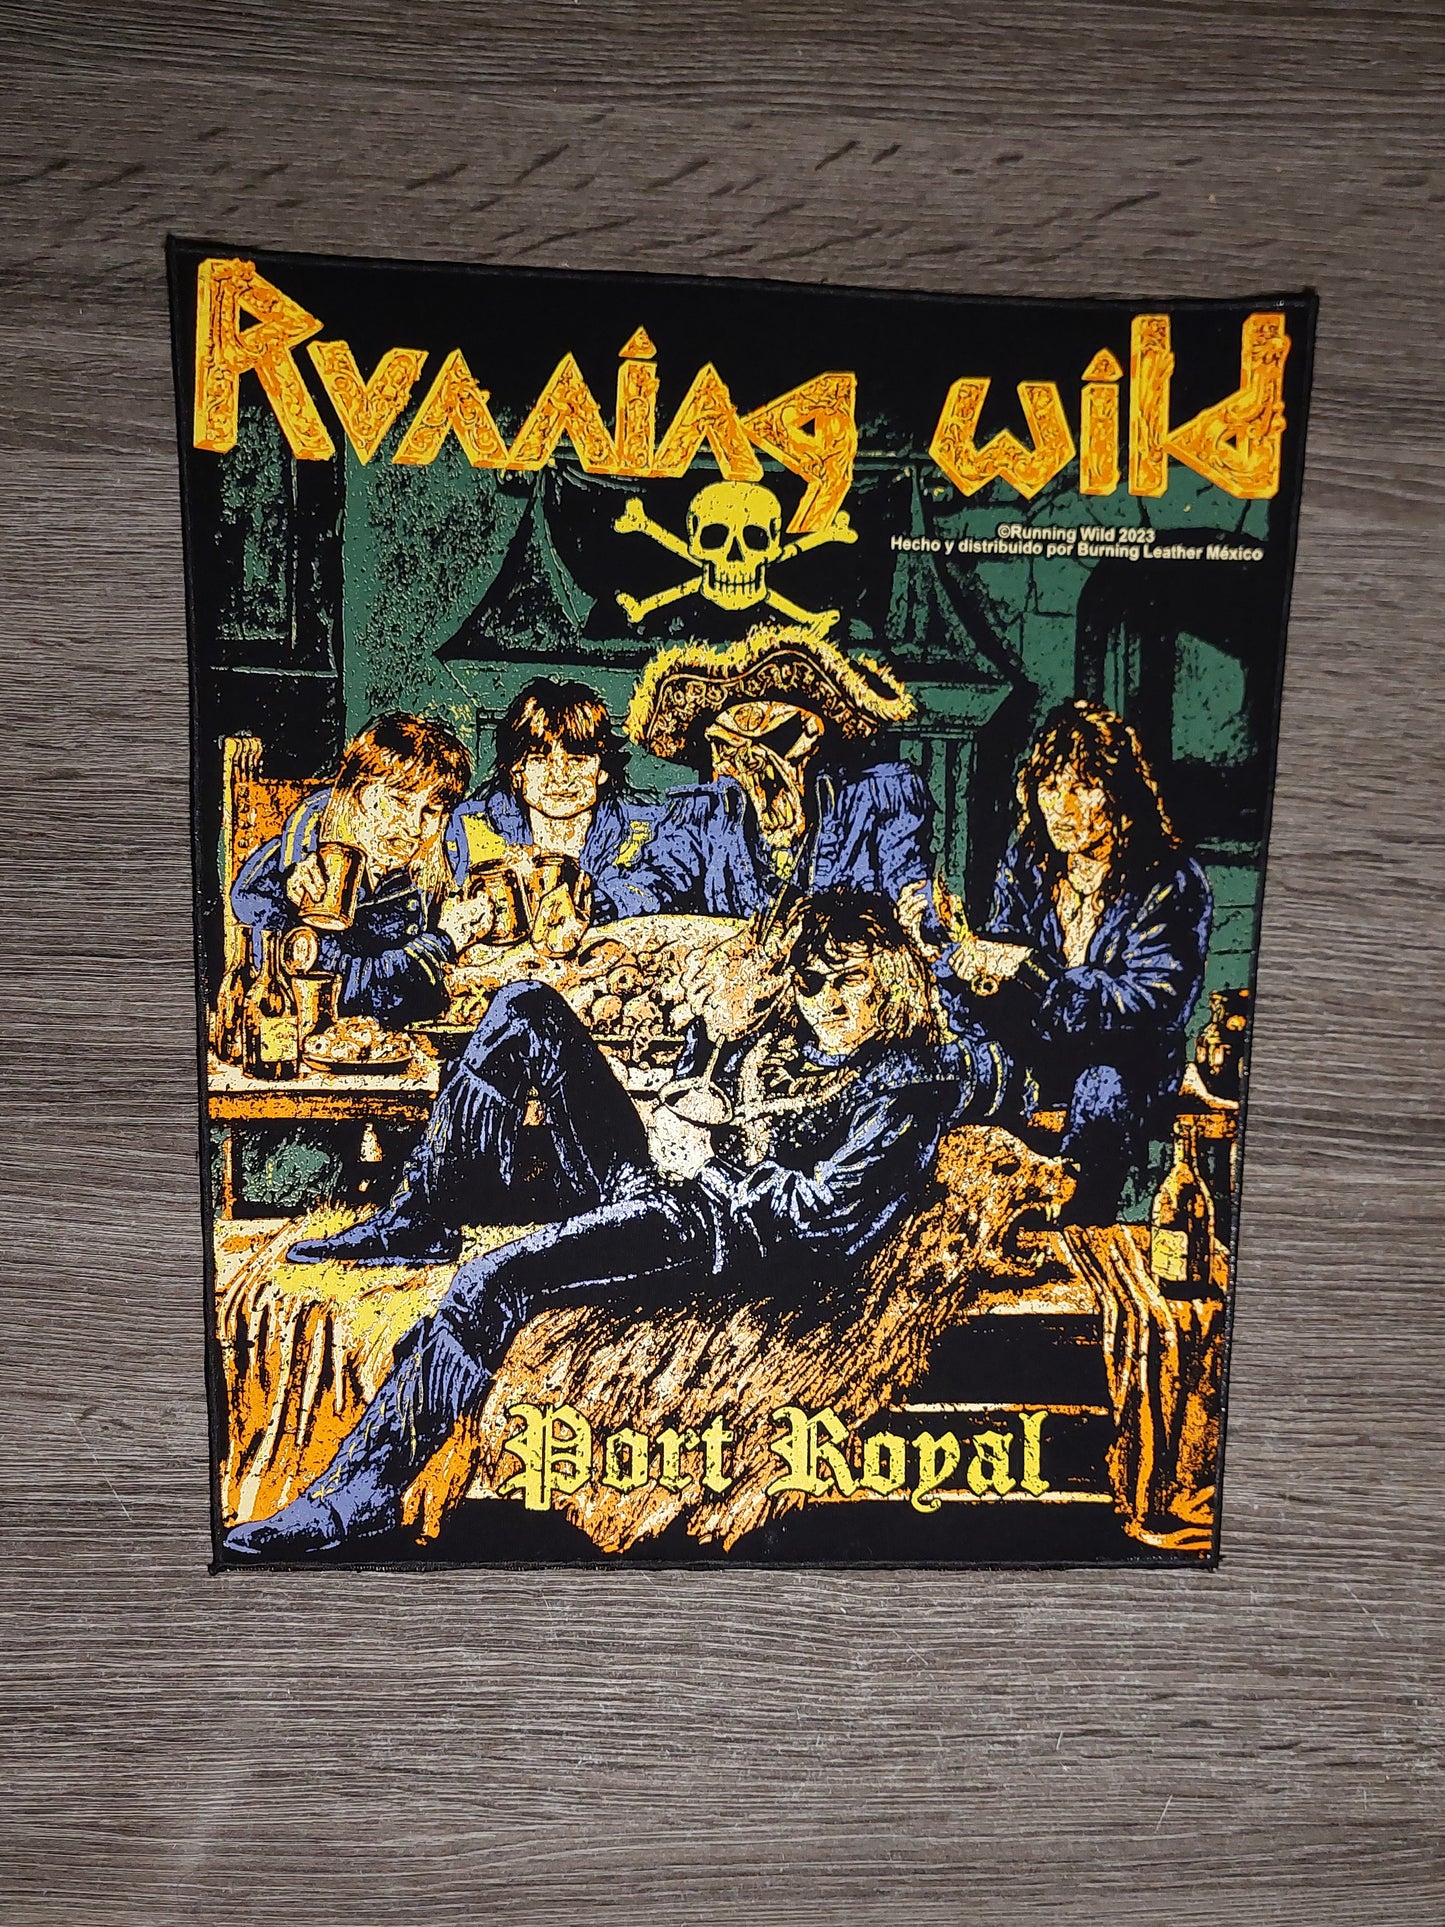 Running wild - Port royal backpatch